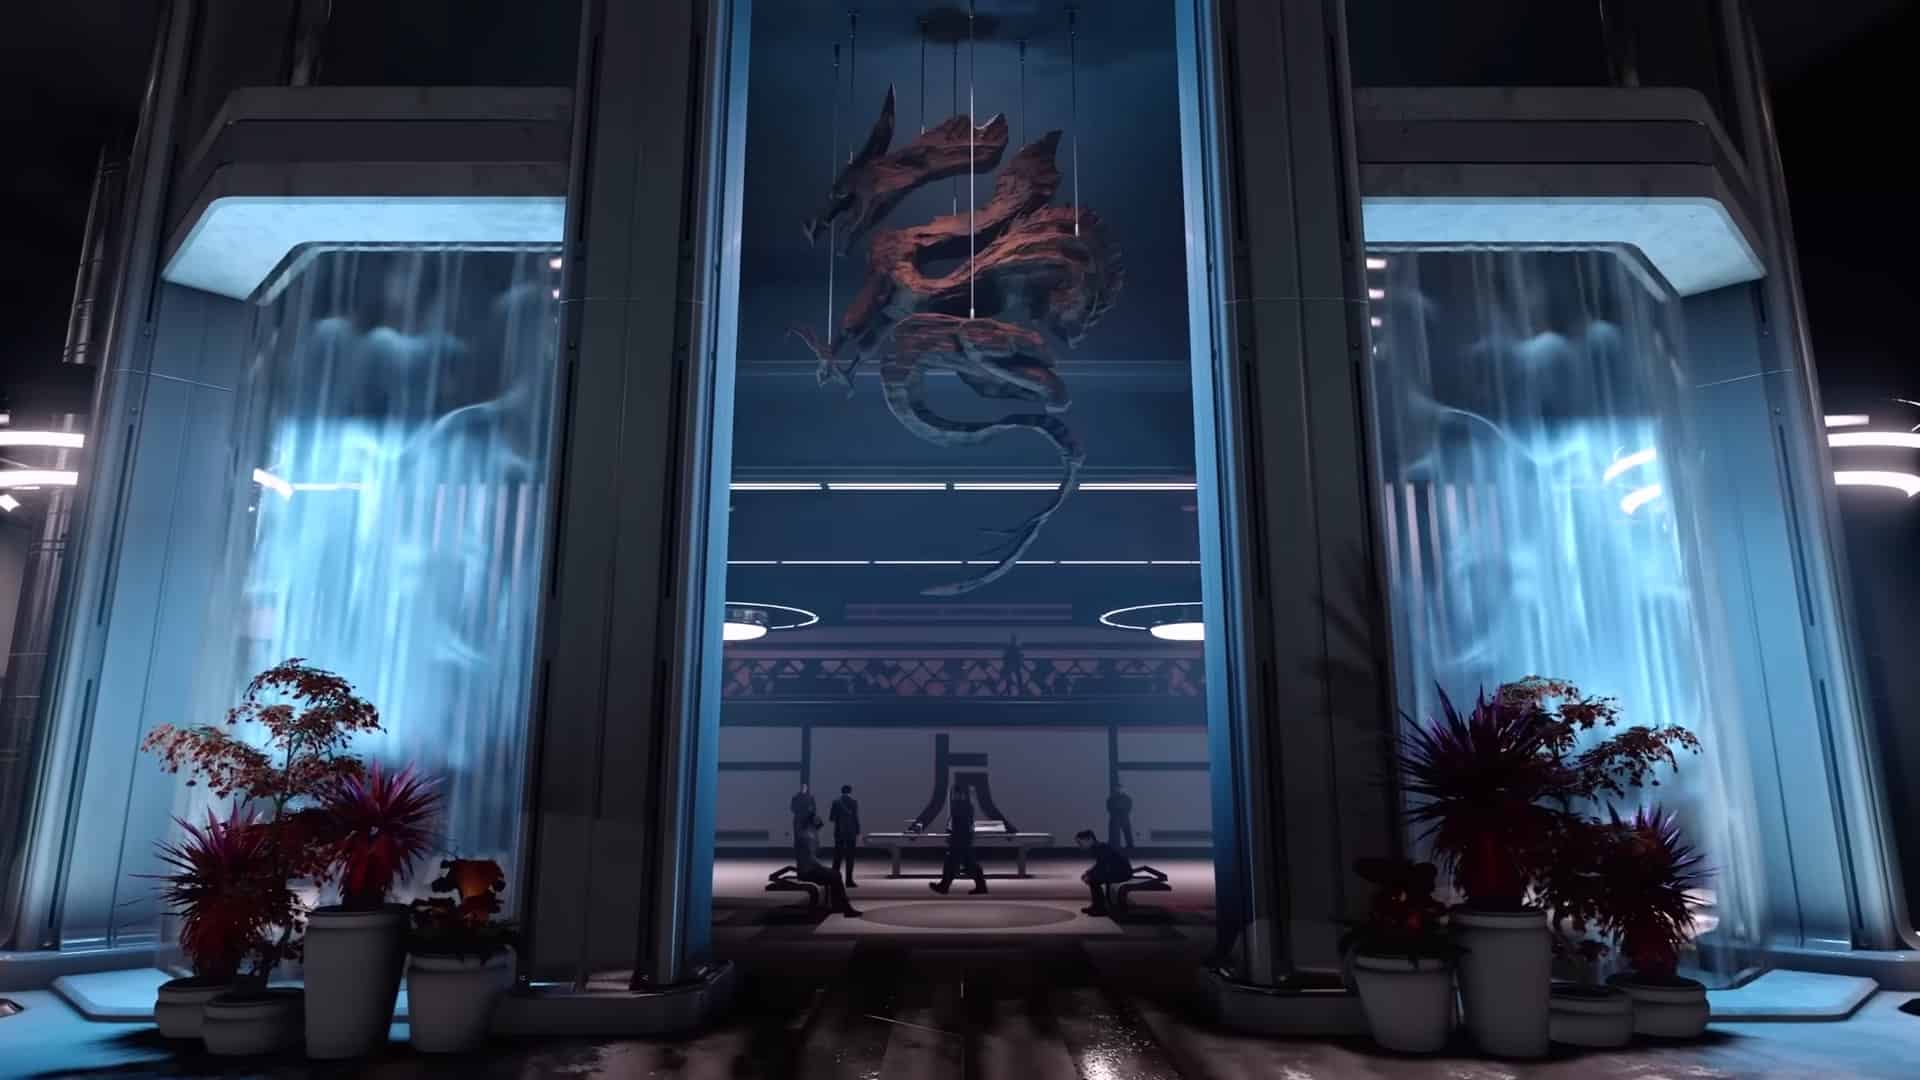 Starfield Neon City: The entrance to a room with the Ryujin Industries logo hanging from the ceiling.